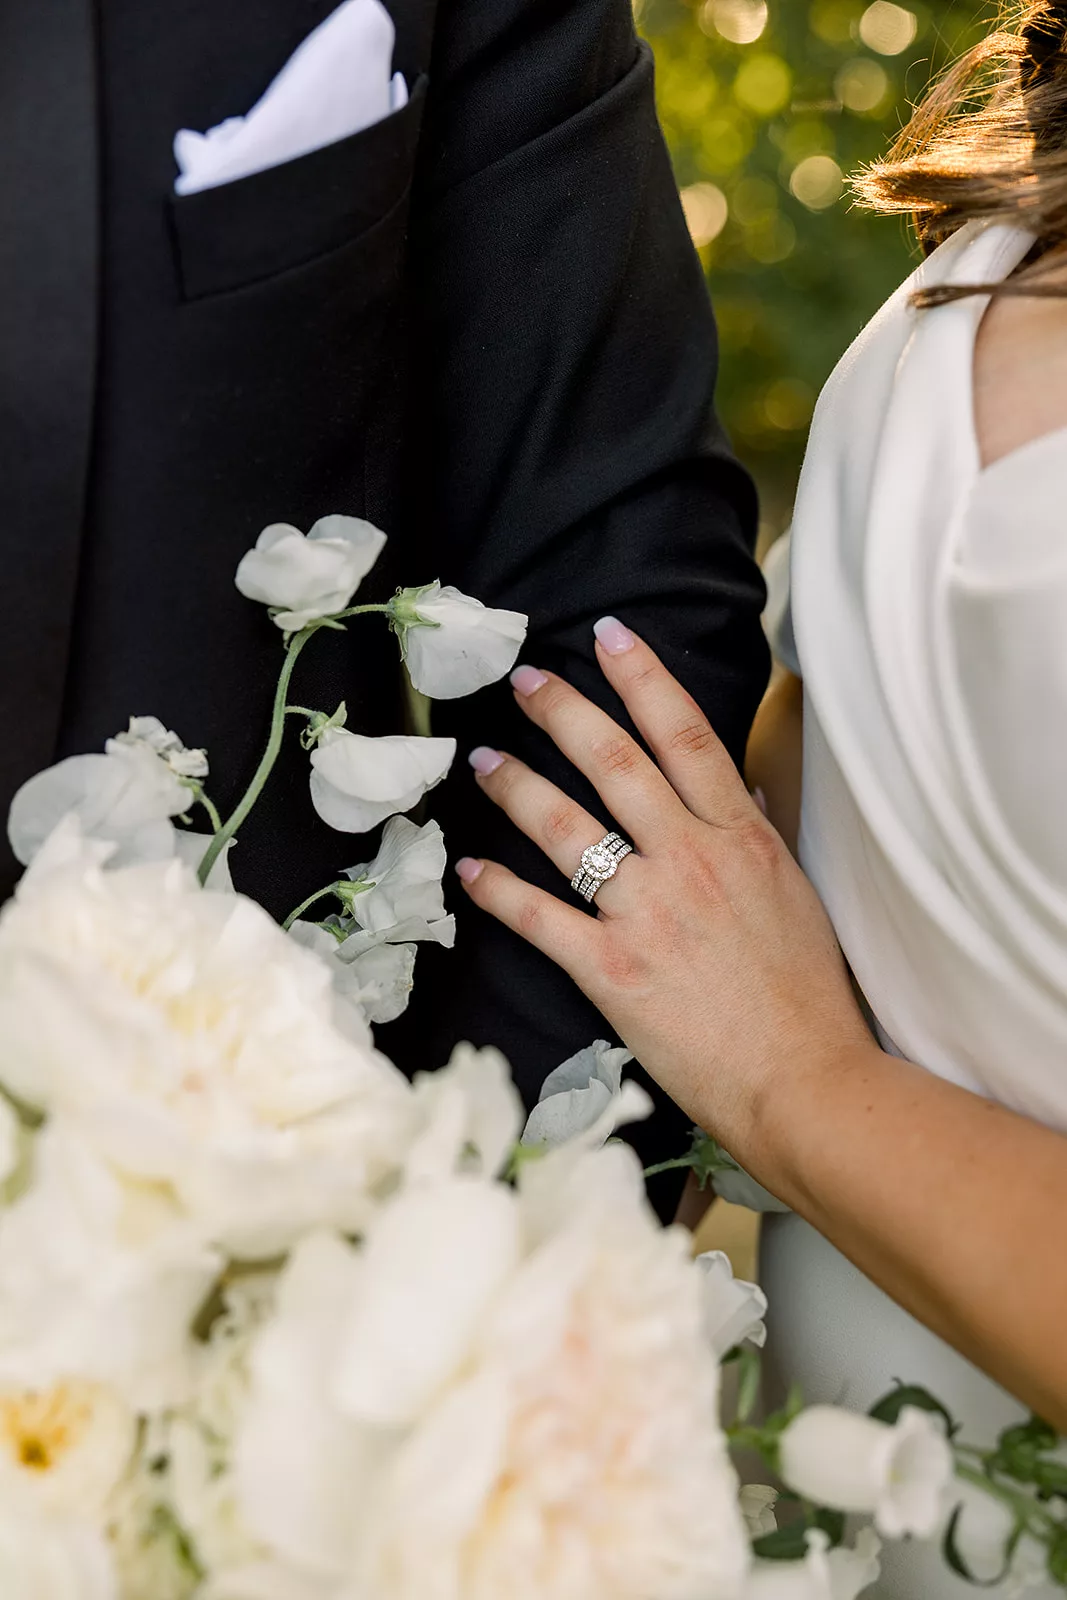 Details of a bride's ring hand holding her groom's arm